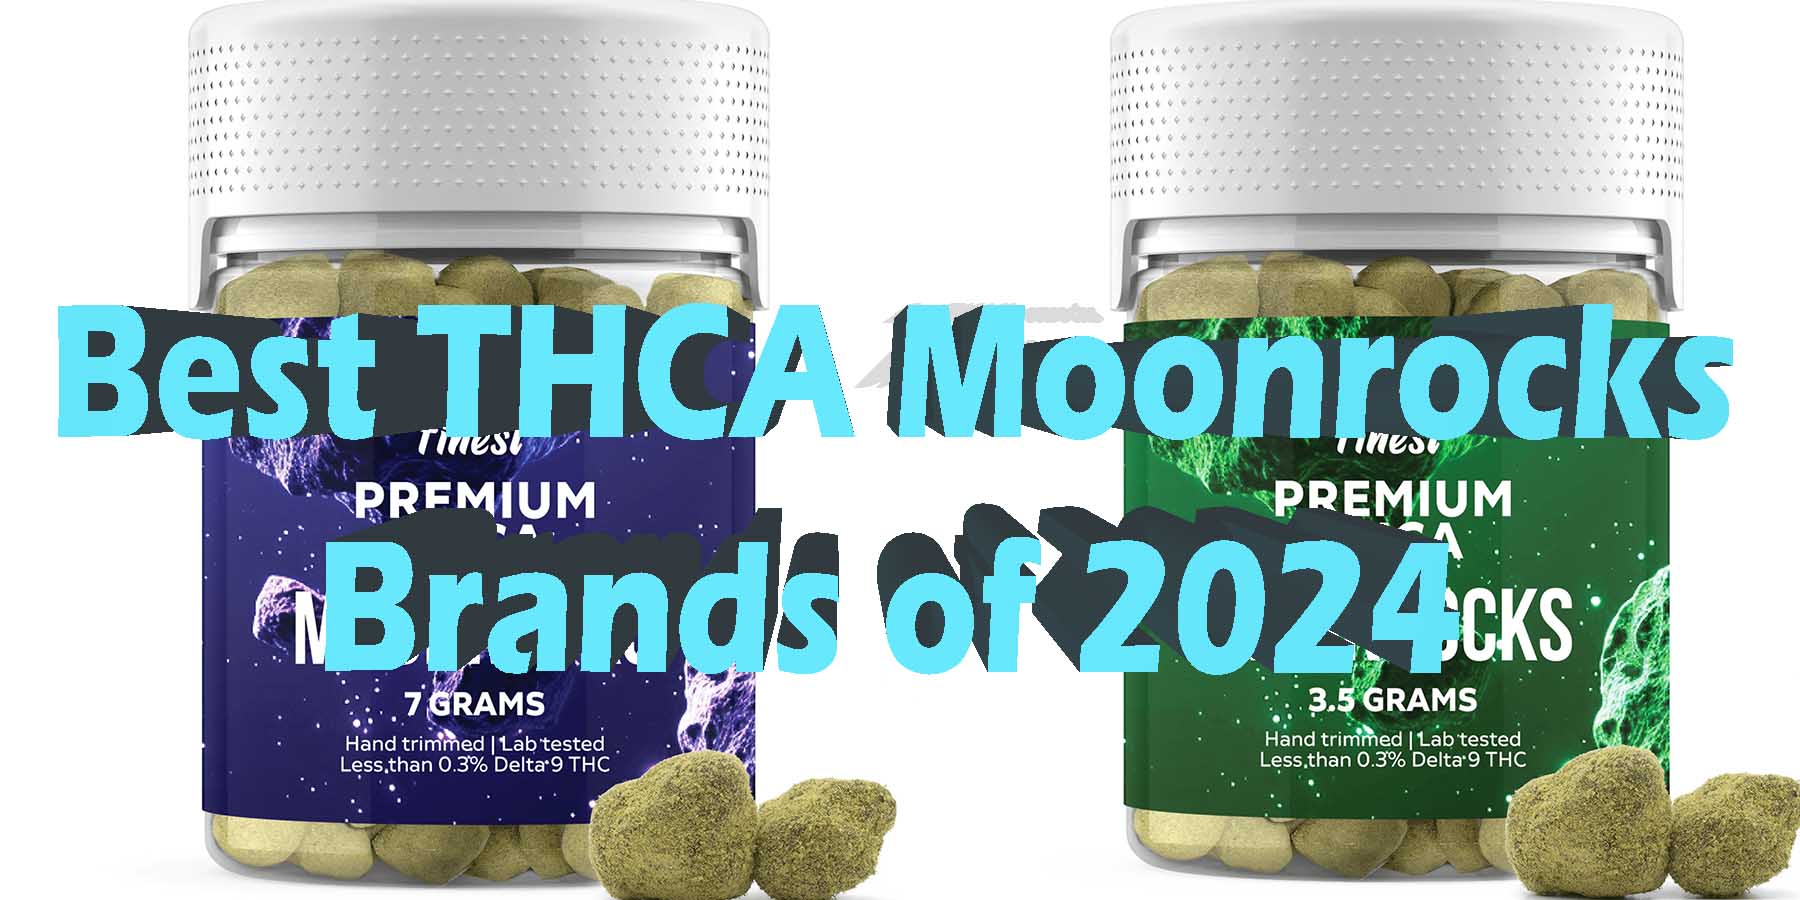 Best THCA Moonrocks Brands of 2024 How to Take Them Safely LowestPrice Coupon Discount For Smoking Best High Smoke Shop Online Near Me Bloomz